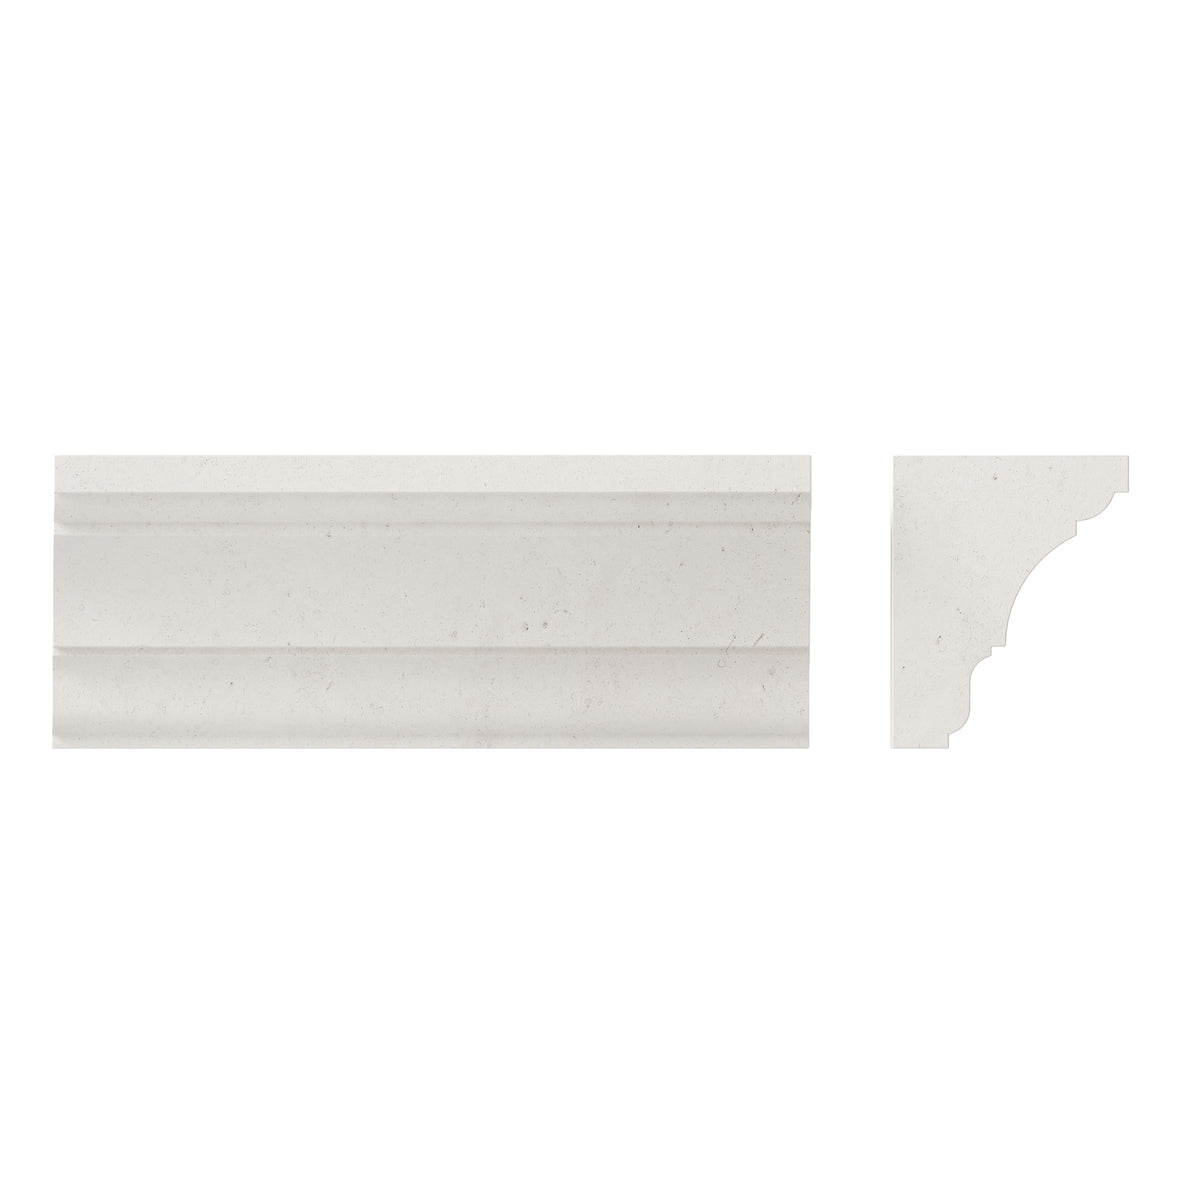 Heritage Family Crown Moulding Main Product Slider View